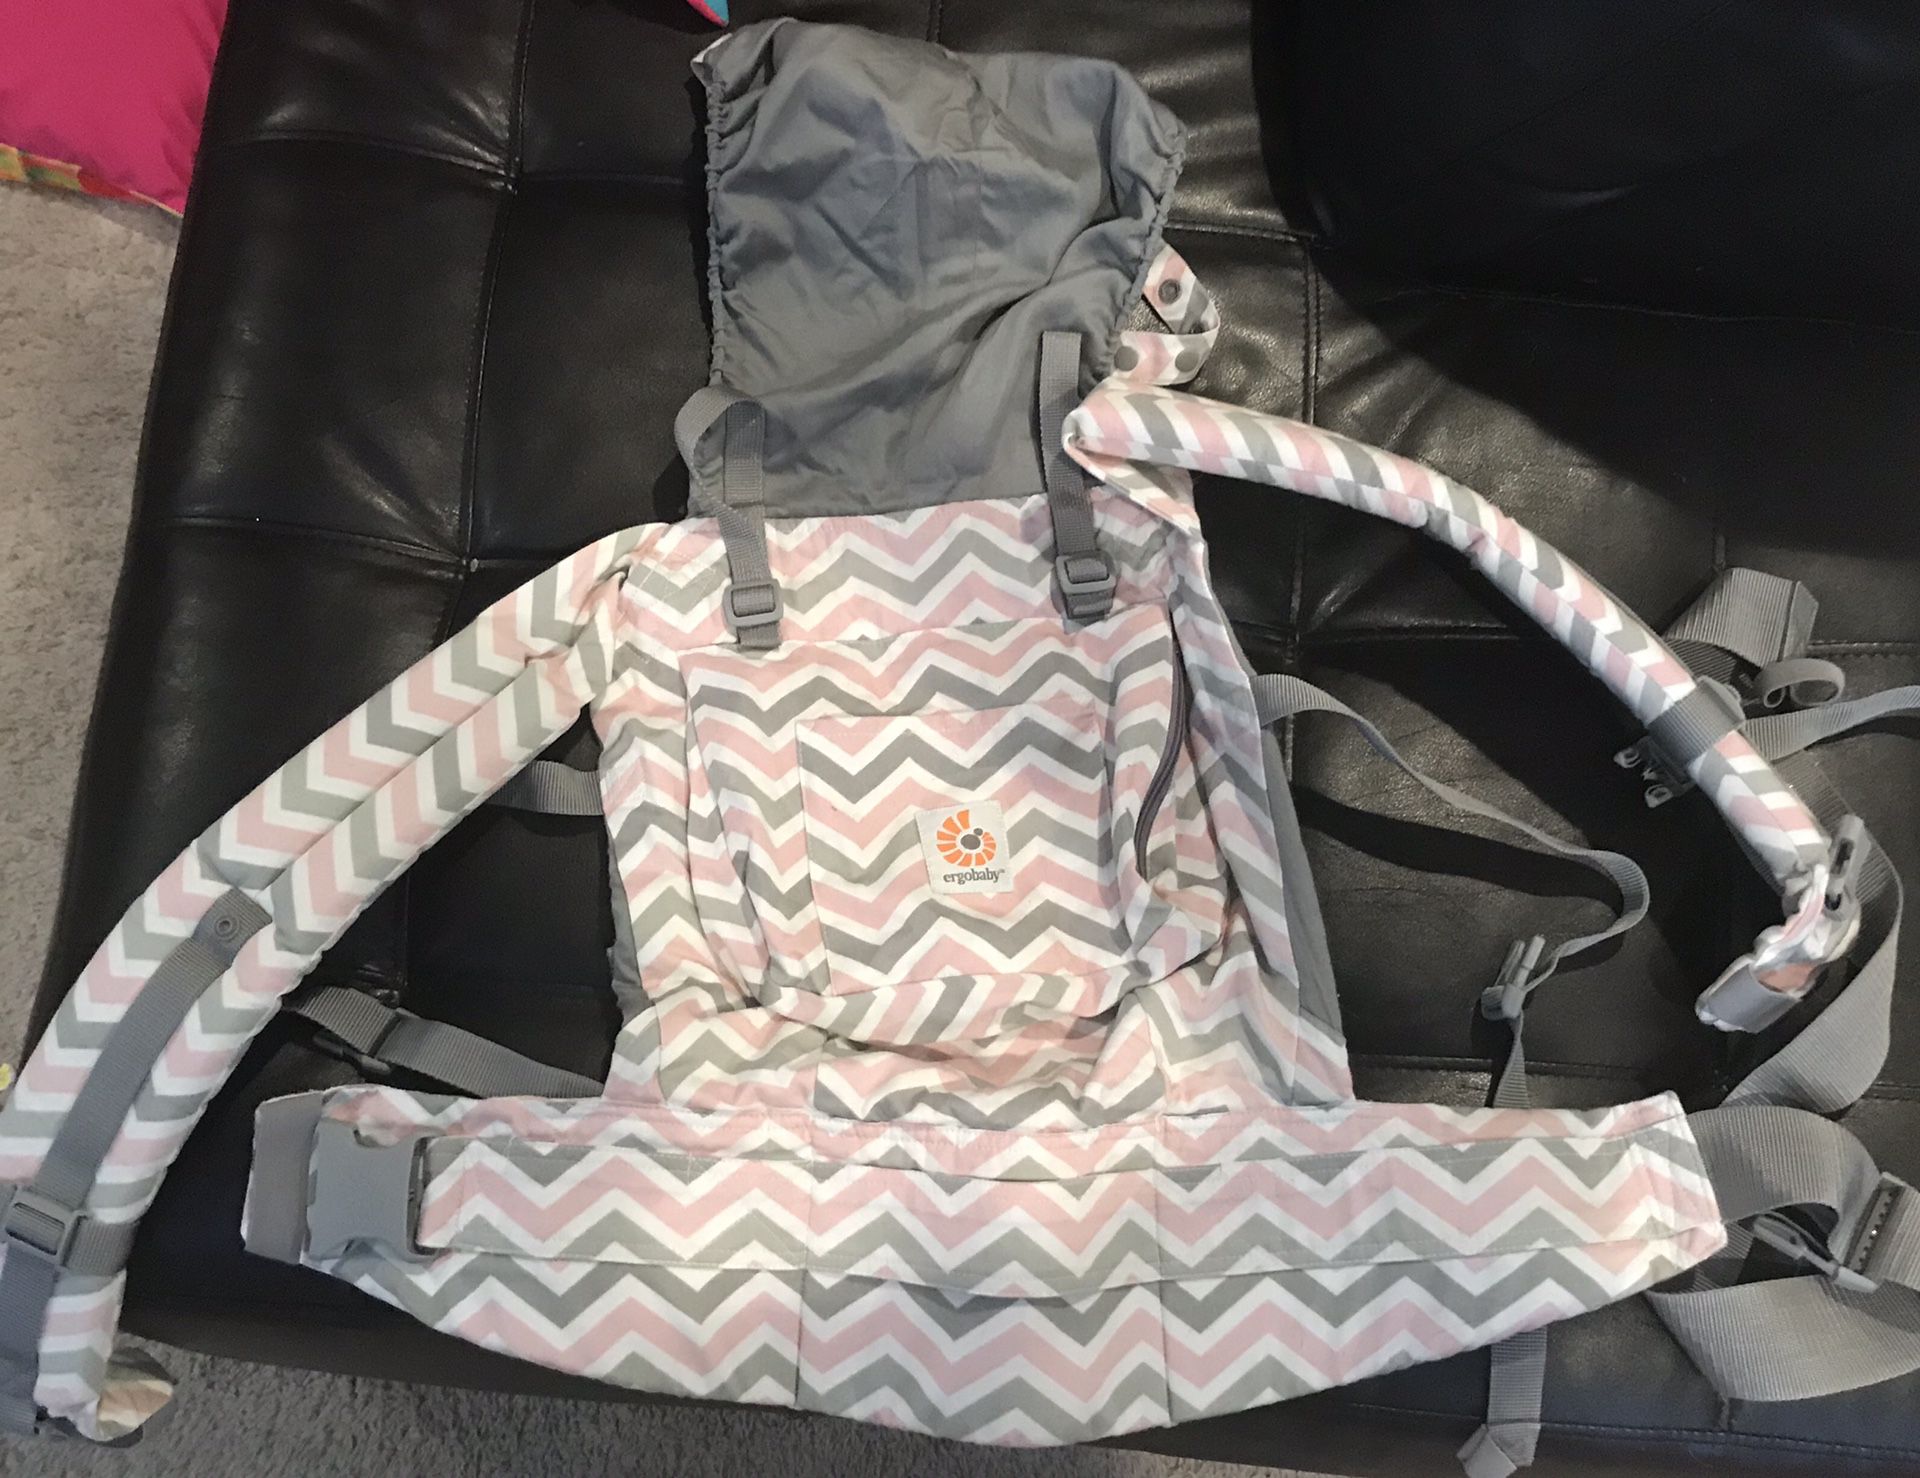 Ergo baby carrier in pink and gray $45 like new